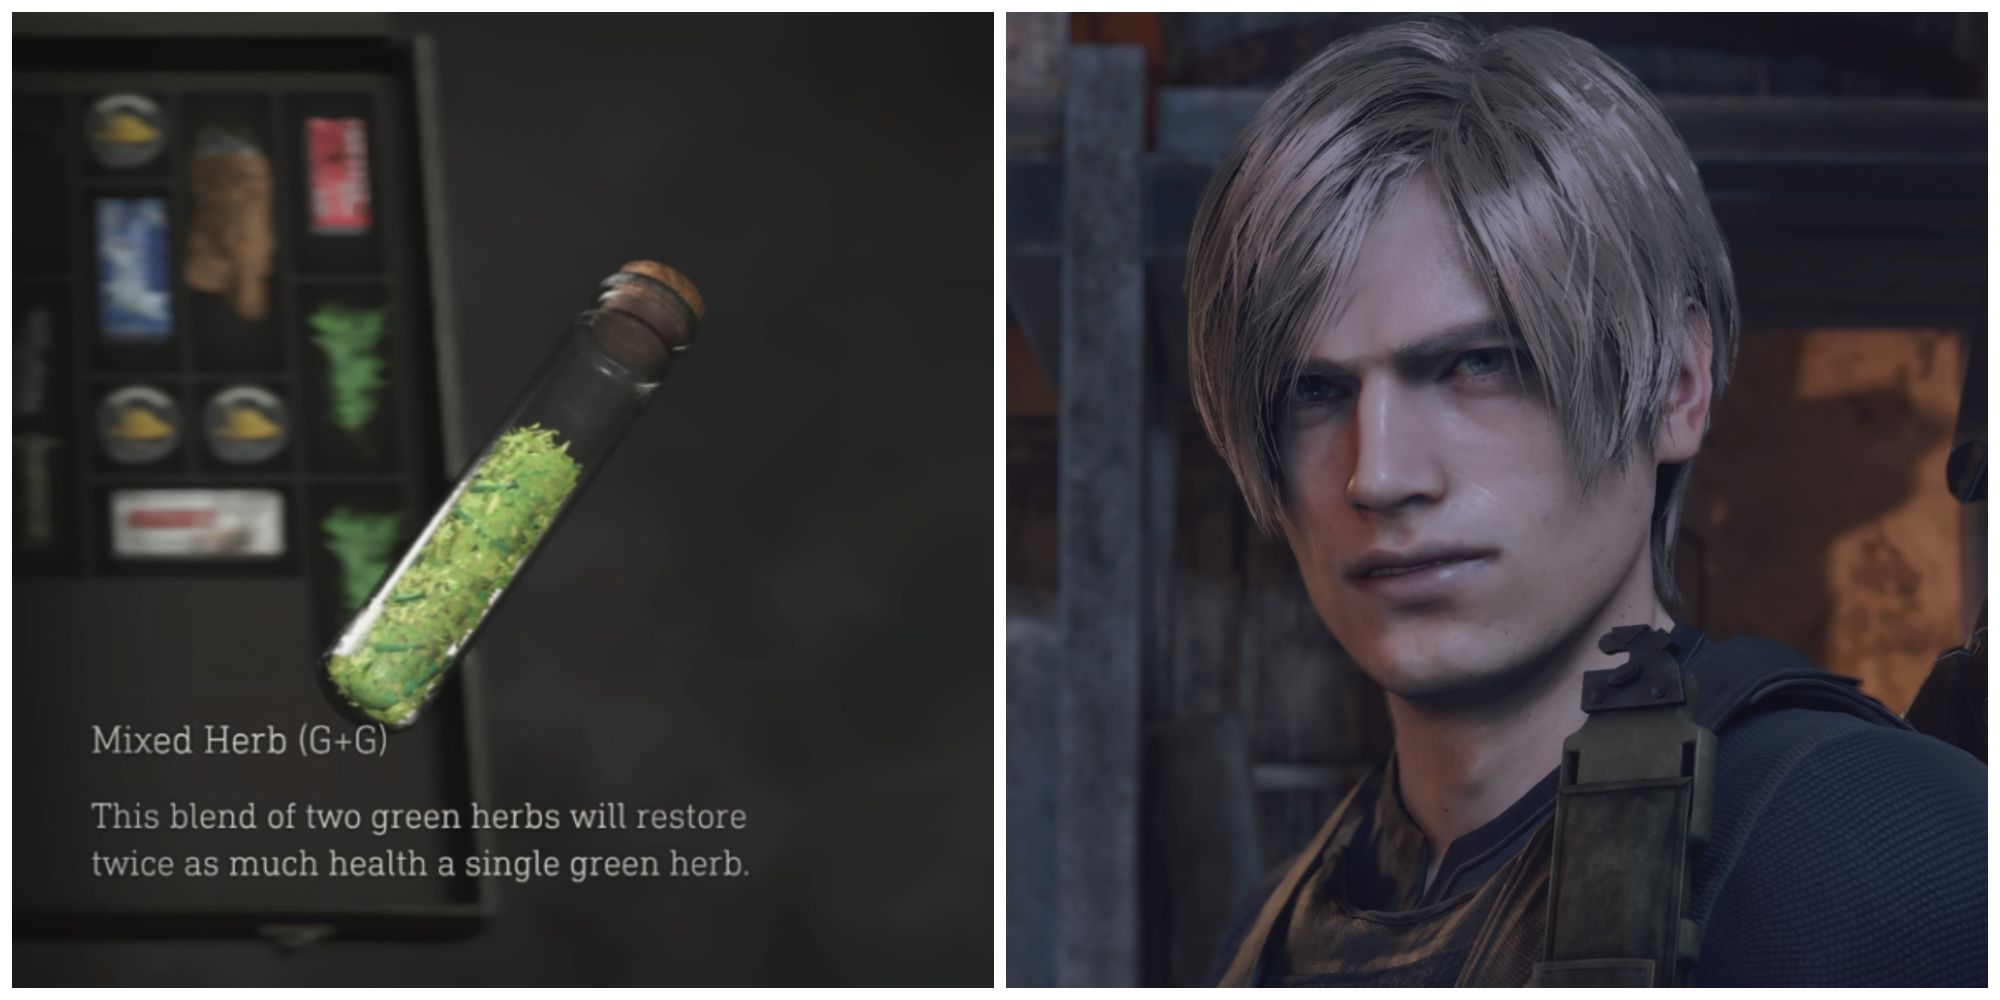 Mixed Herb healing item and Leon Kennedy in Resident Evil 4 remake